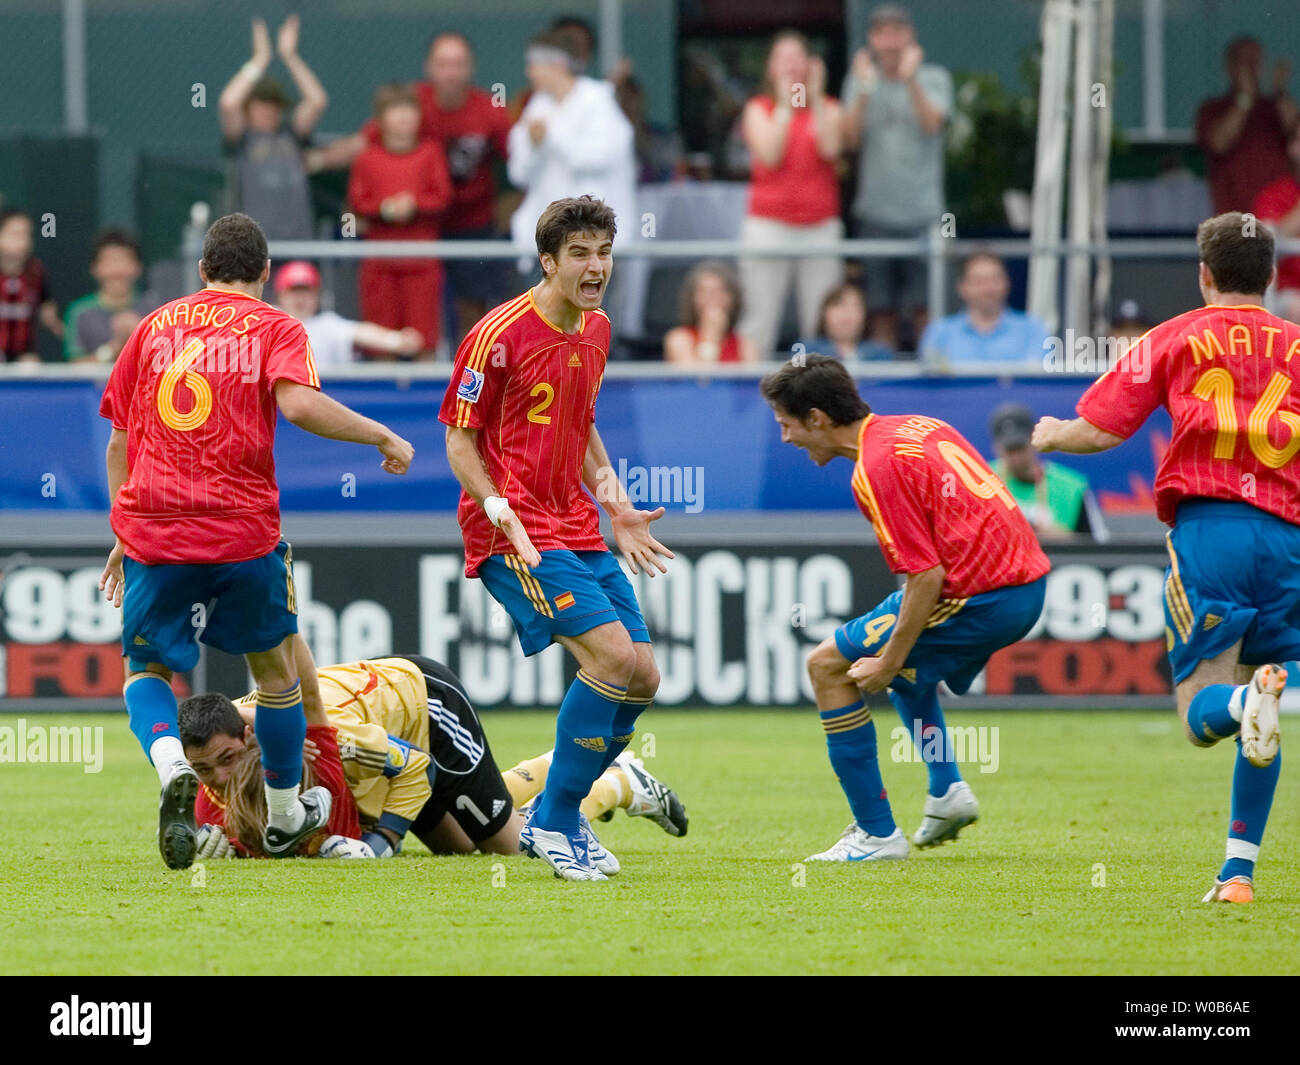 Spain's goalie Adan tackles the game tying goal scorer Diego Capel while teammates (L-R) Mario Suarez, Antonio Barragan , Marc Valiente, and Juan Manuel Mata celebrate during the second half of a 2007 FIFA U-20 World Cup soccer match against Uruguay at Swangard stadium in Burnaby, British Columbia,  July 1, 2007. The game ended in a 2-2 tie.  (UPI Photo/Heinz Ruckemann) Stock Photo